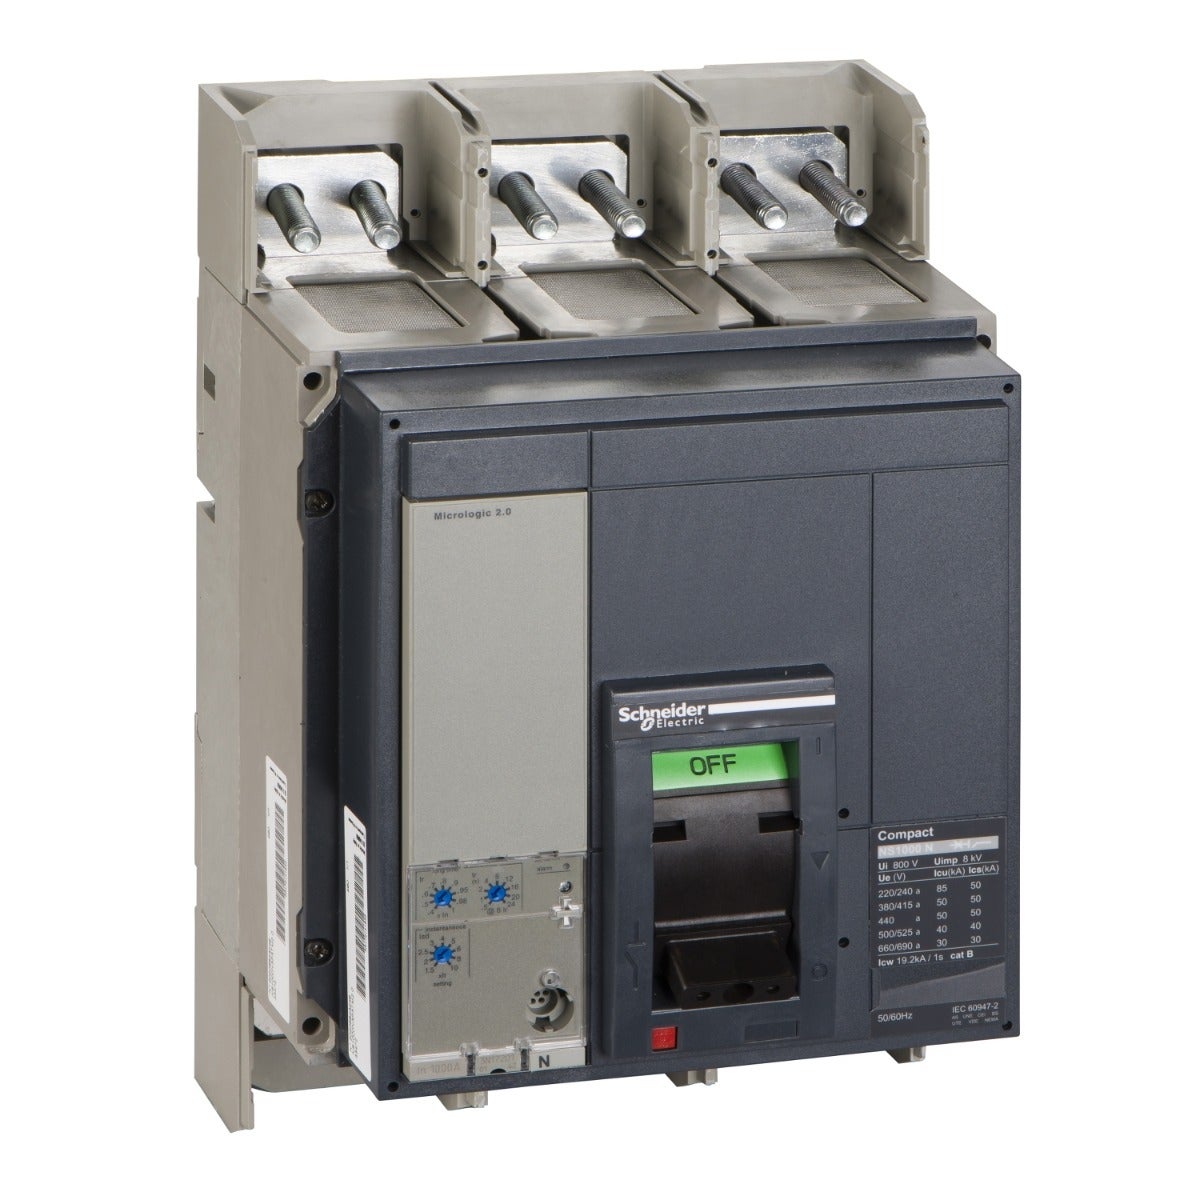 Schneider Electric Circuit breaker, Compact NS1000N - Micrologic 2.0 - 1000 A - 3 poles 3t